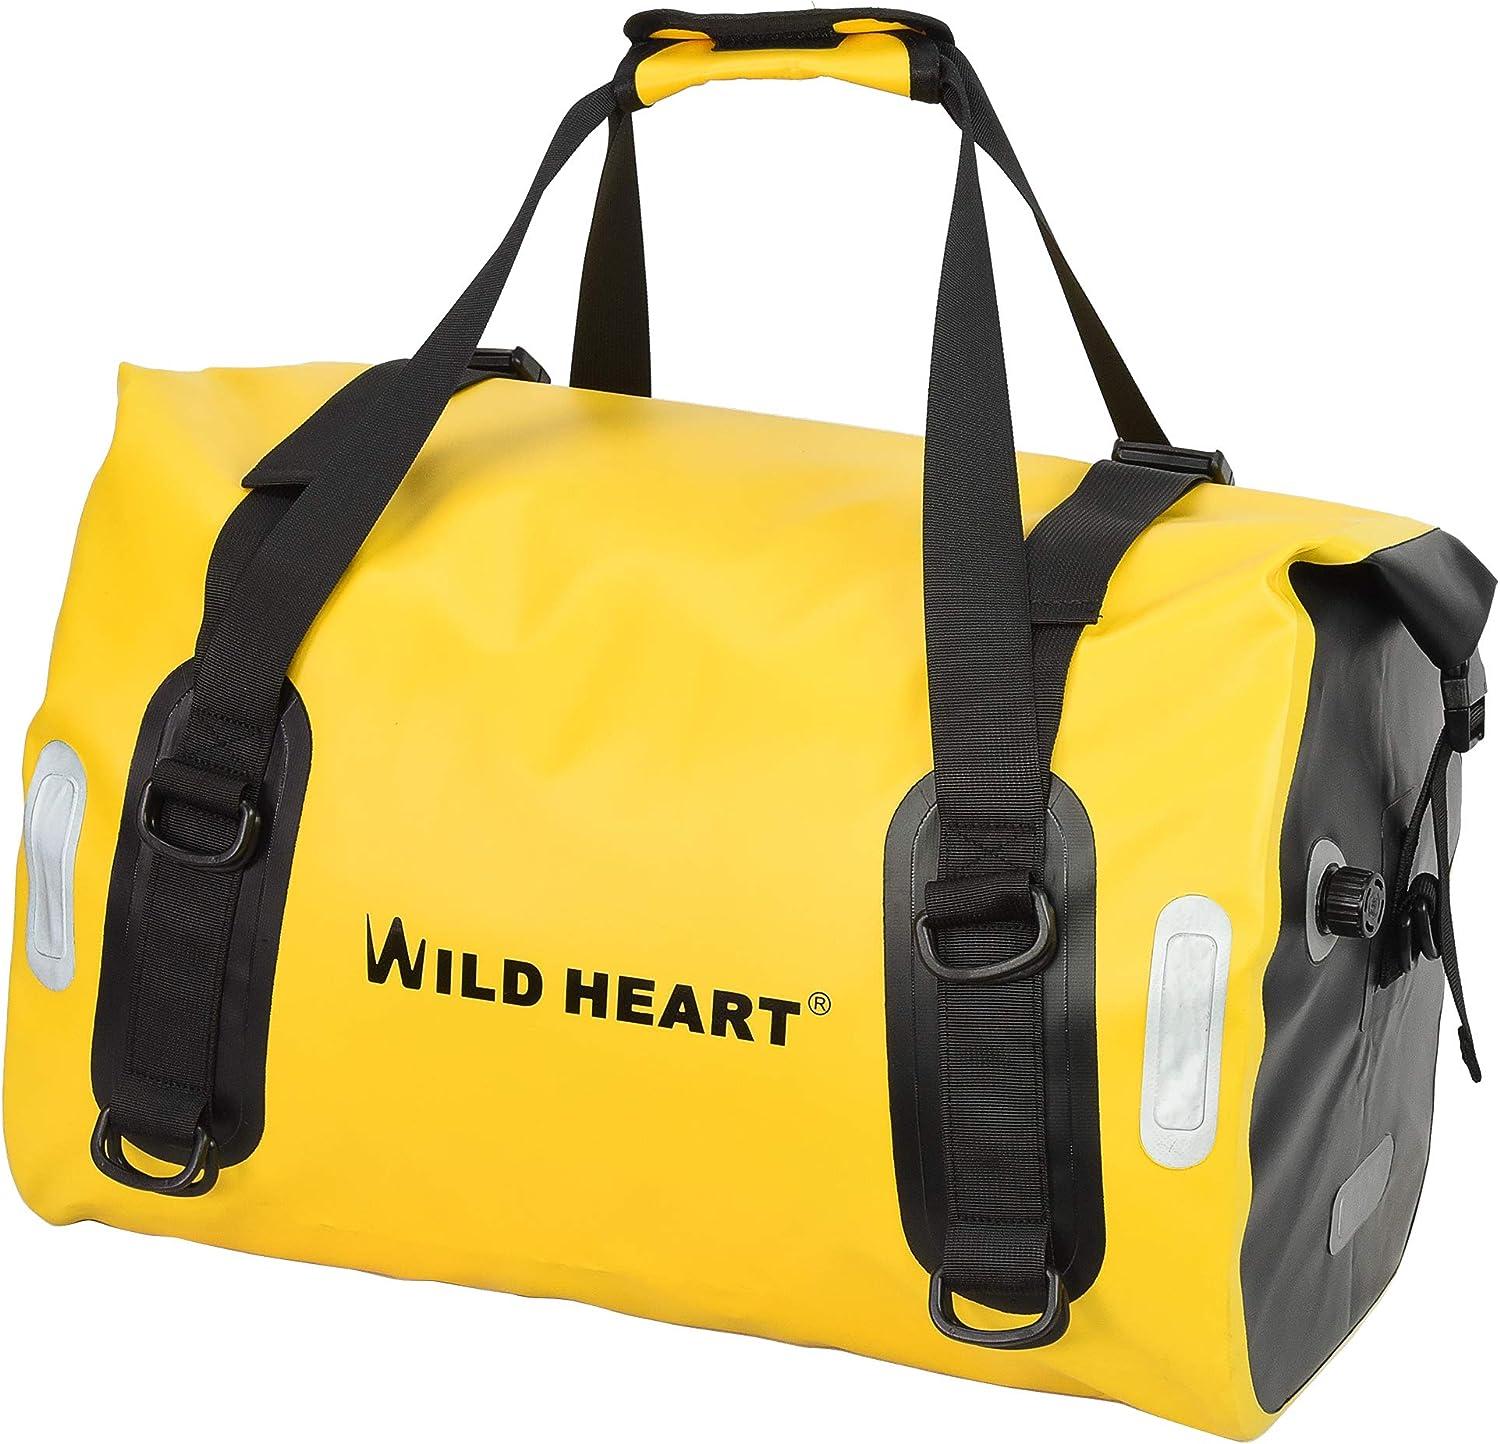  WILD HEART Waterproof Bag 55L 66L 77L Motorcycle Dry Duffel Bag  for Travel,Motorcycling, Cycling,Hiking,Camping (66L, Yellow) : Automotive